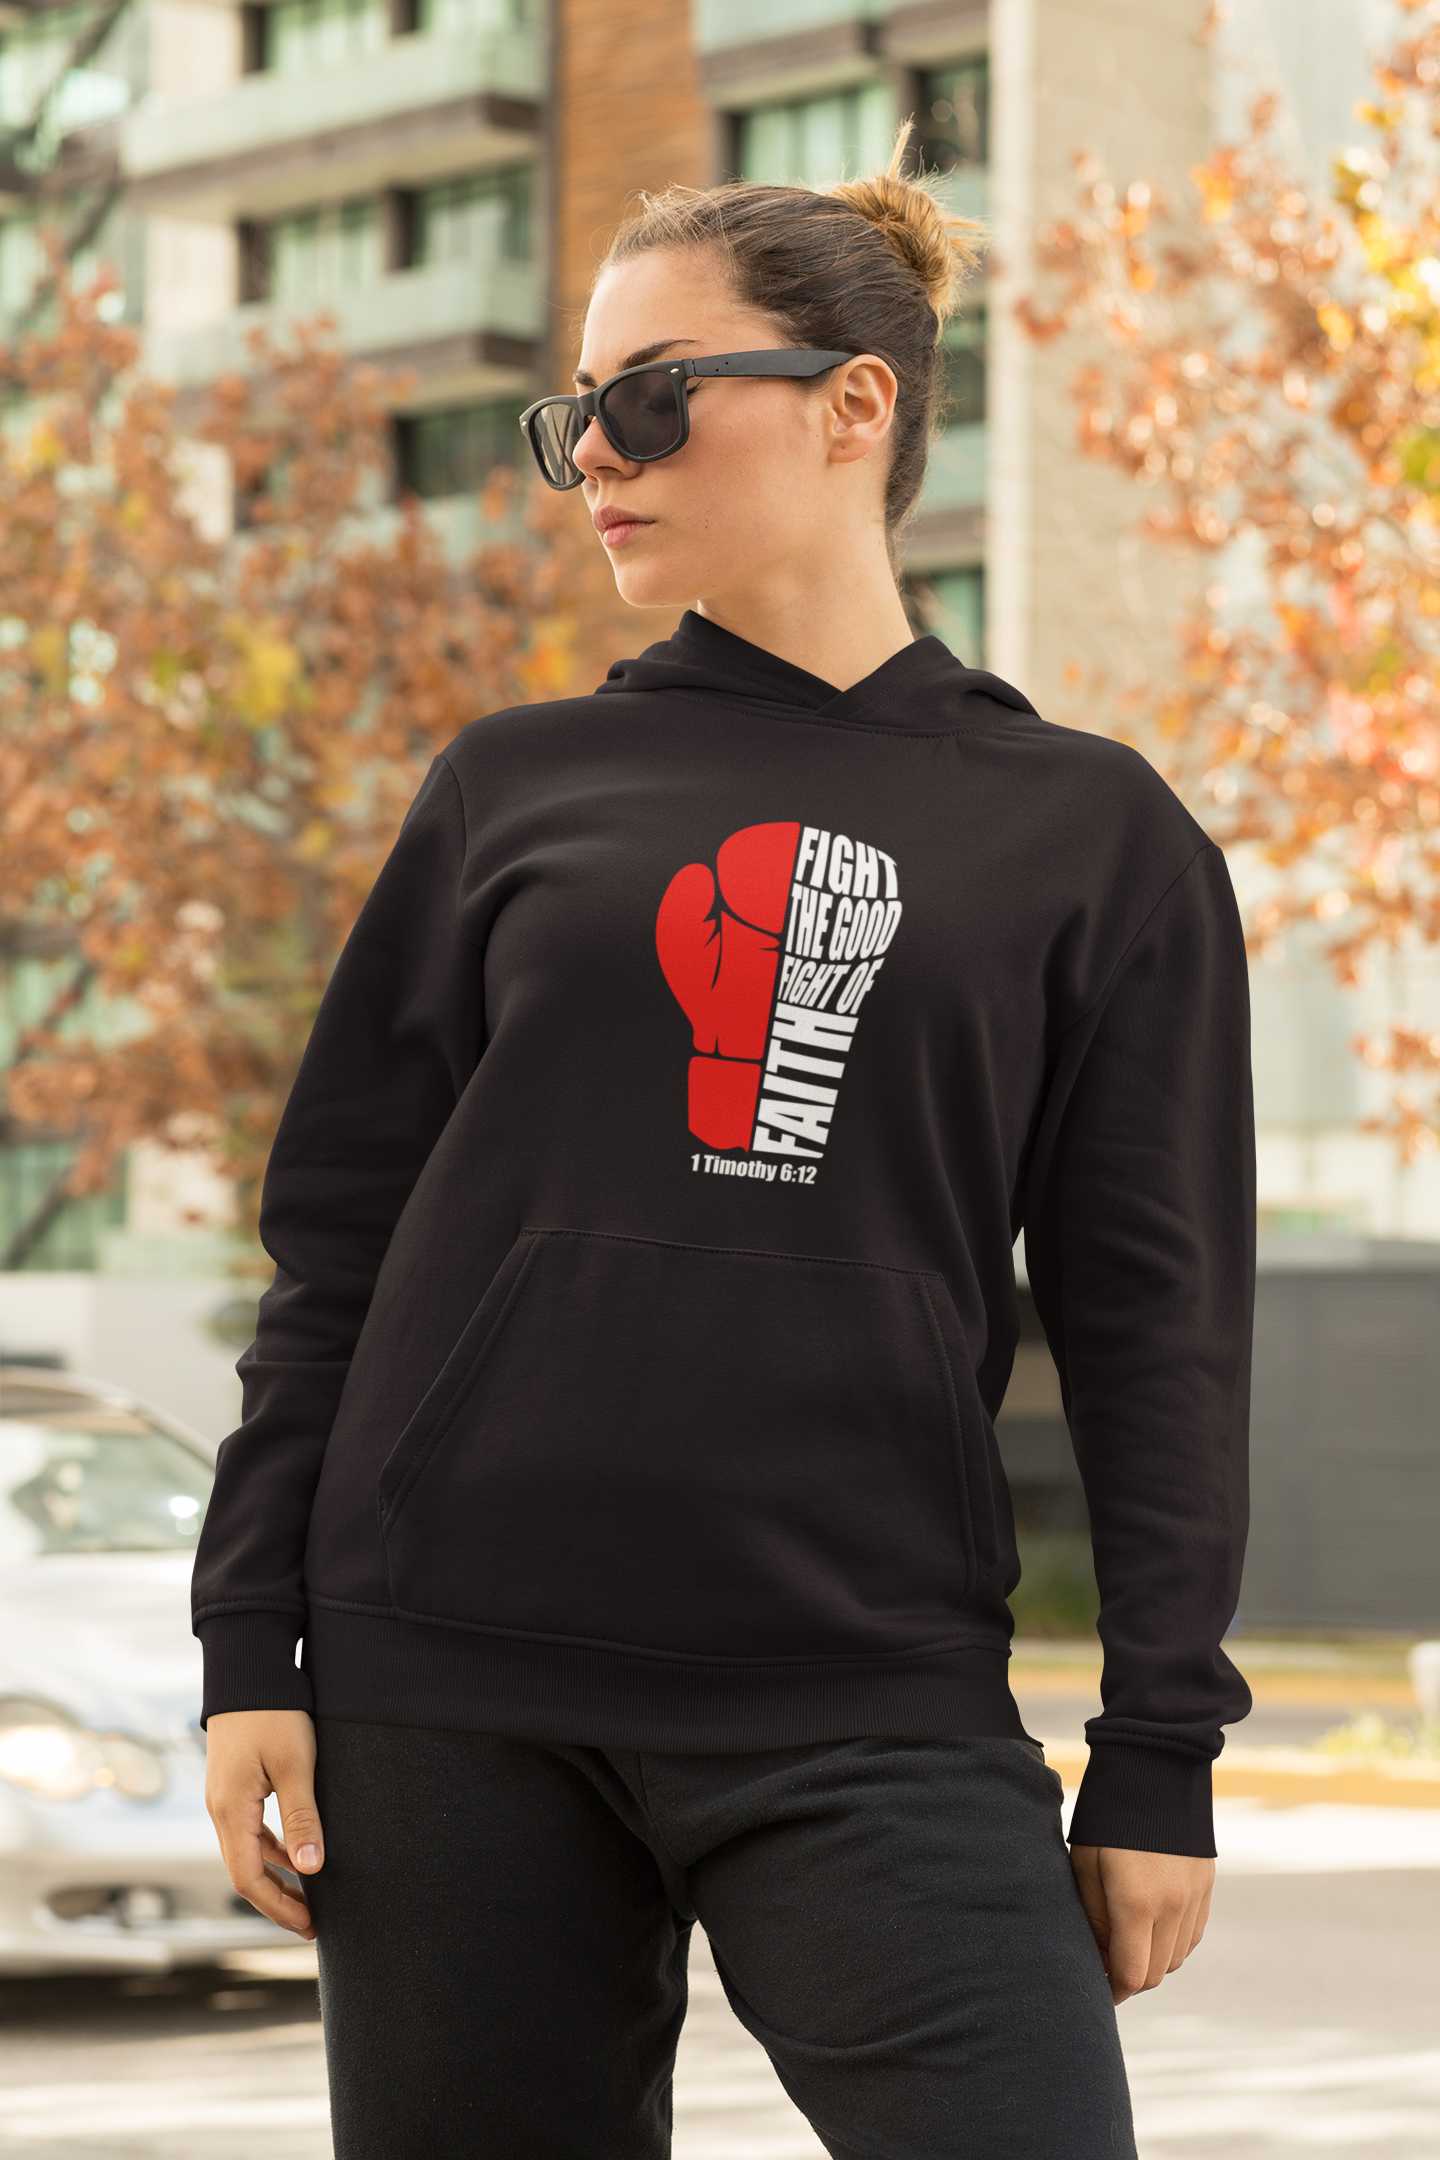 Fight the Good Fight 1 Timothy 6:12 Unisex Hoodie